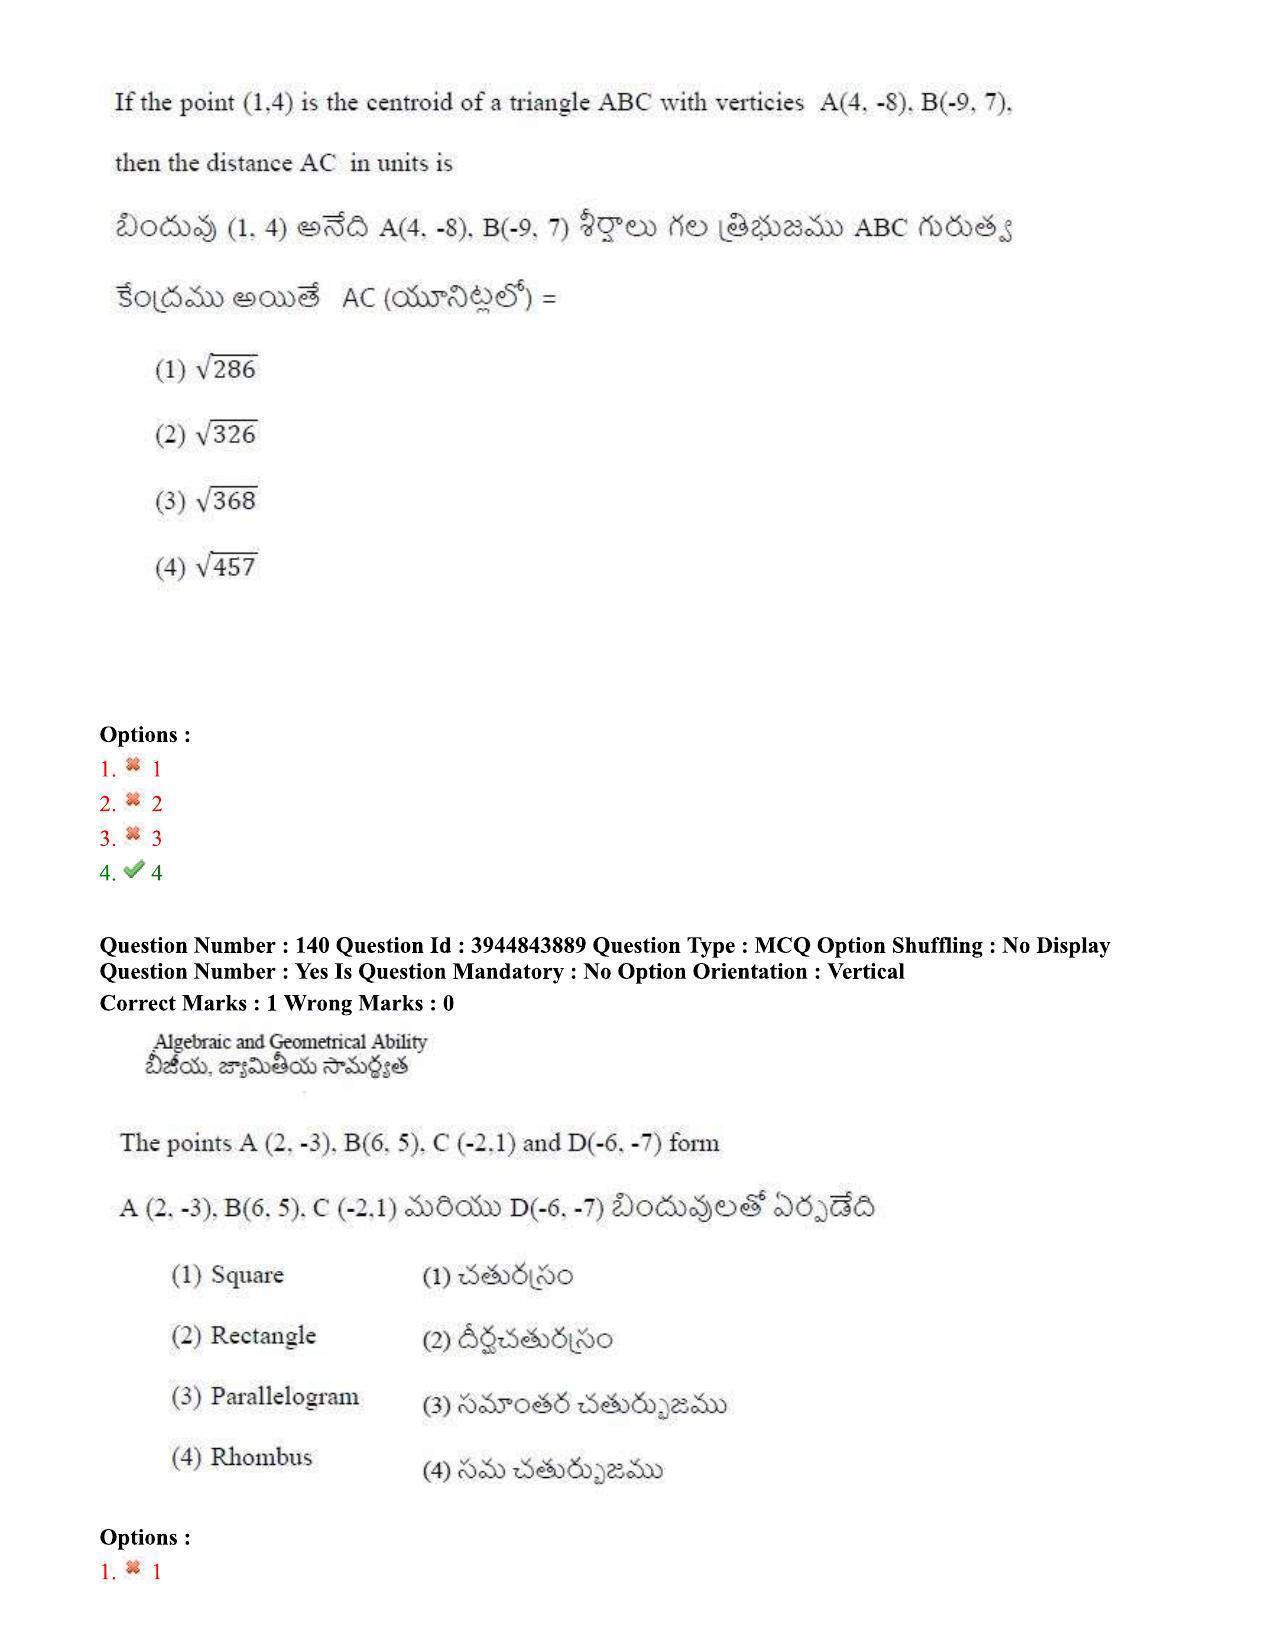 TS ICET 2020 Question Paper 1 - Oct 1, 2020	 - Page 109